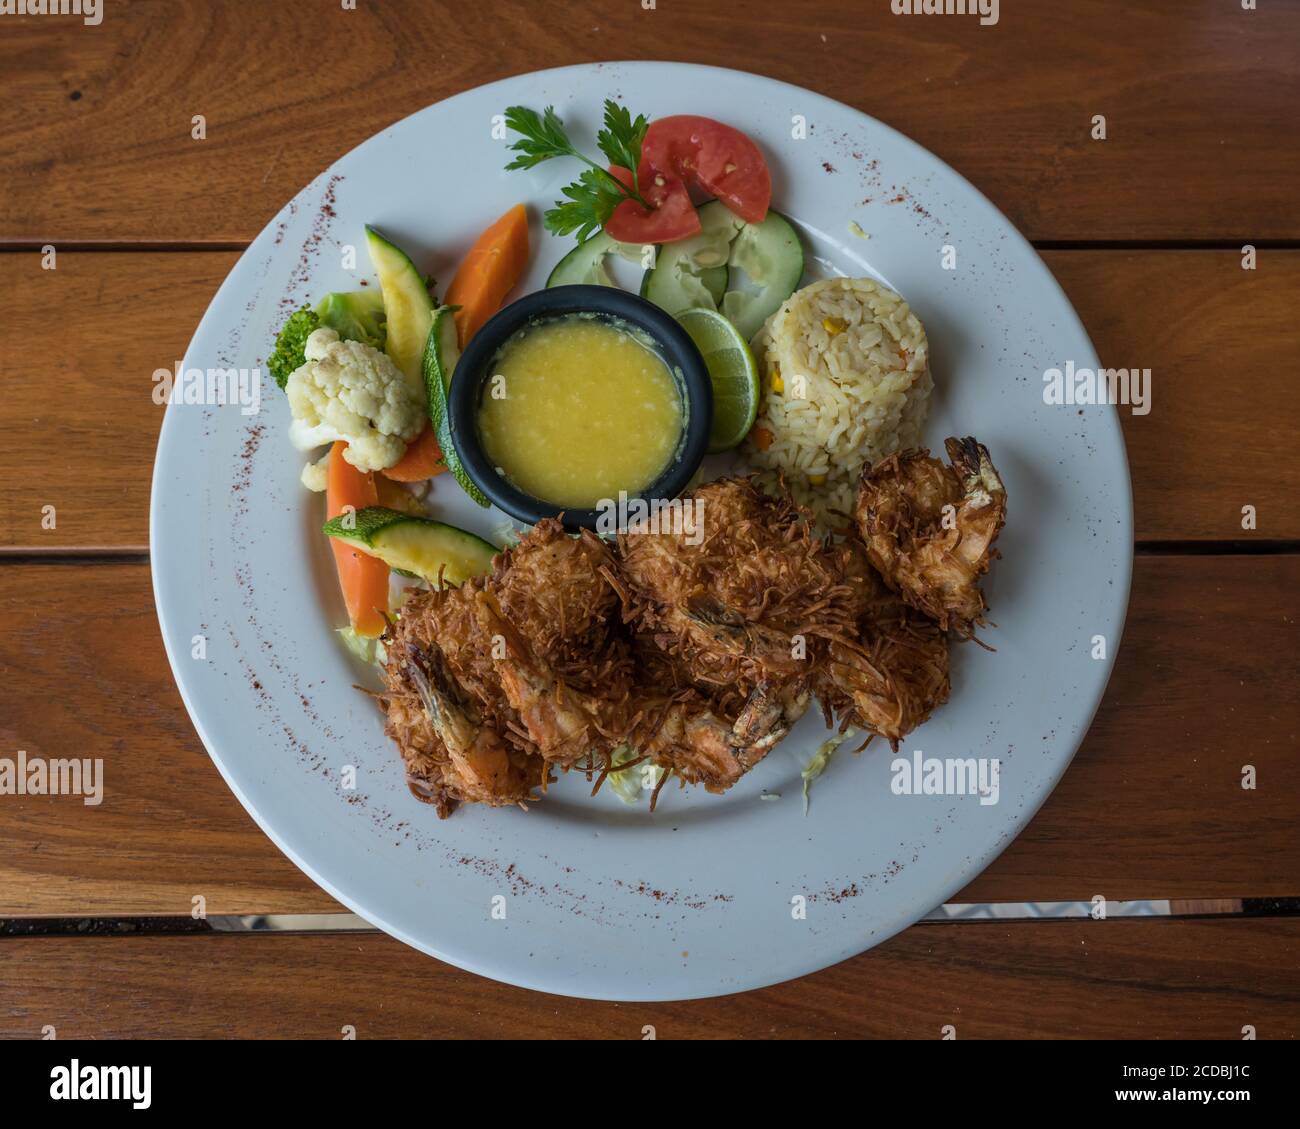 Coconut shrimp with a lime, rice and vegetables by the Caribbean in Mexico. Stock Photo